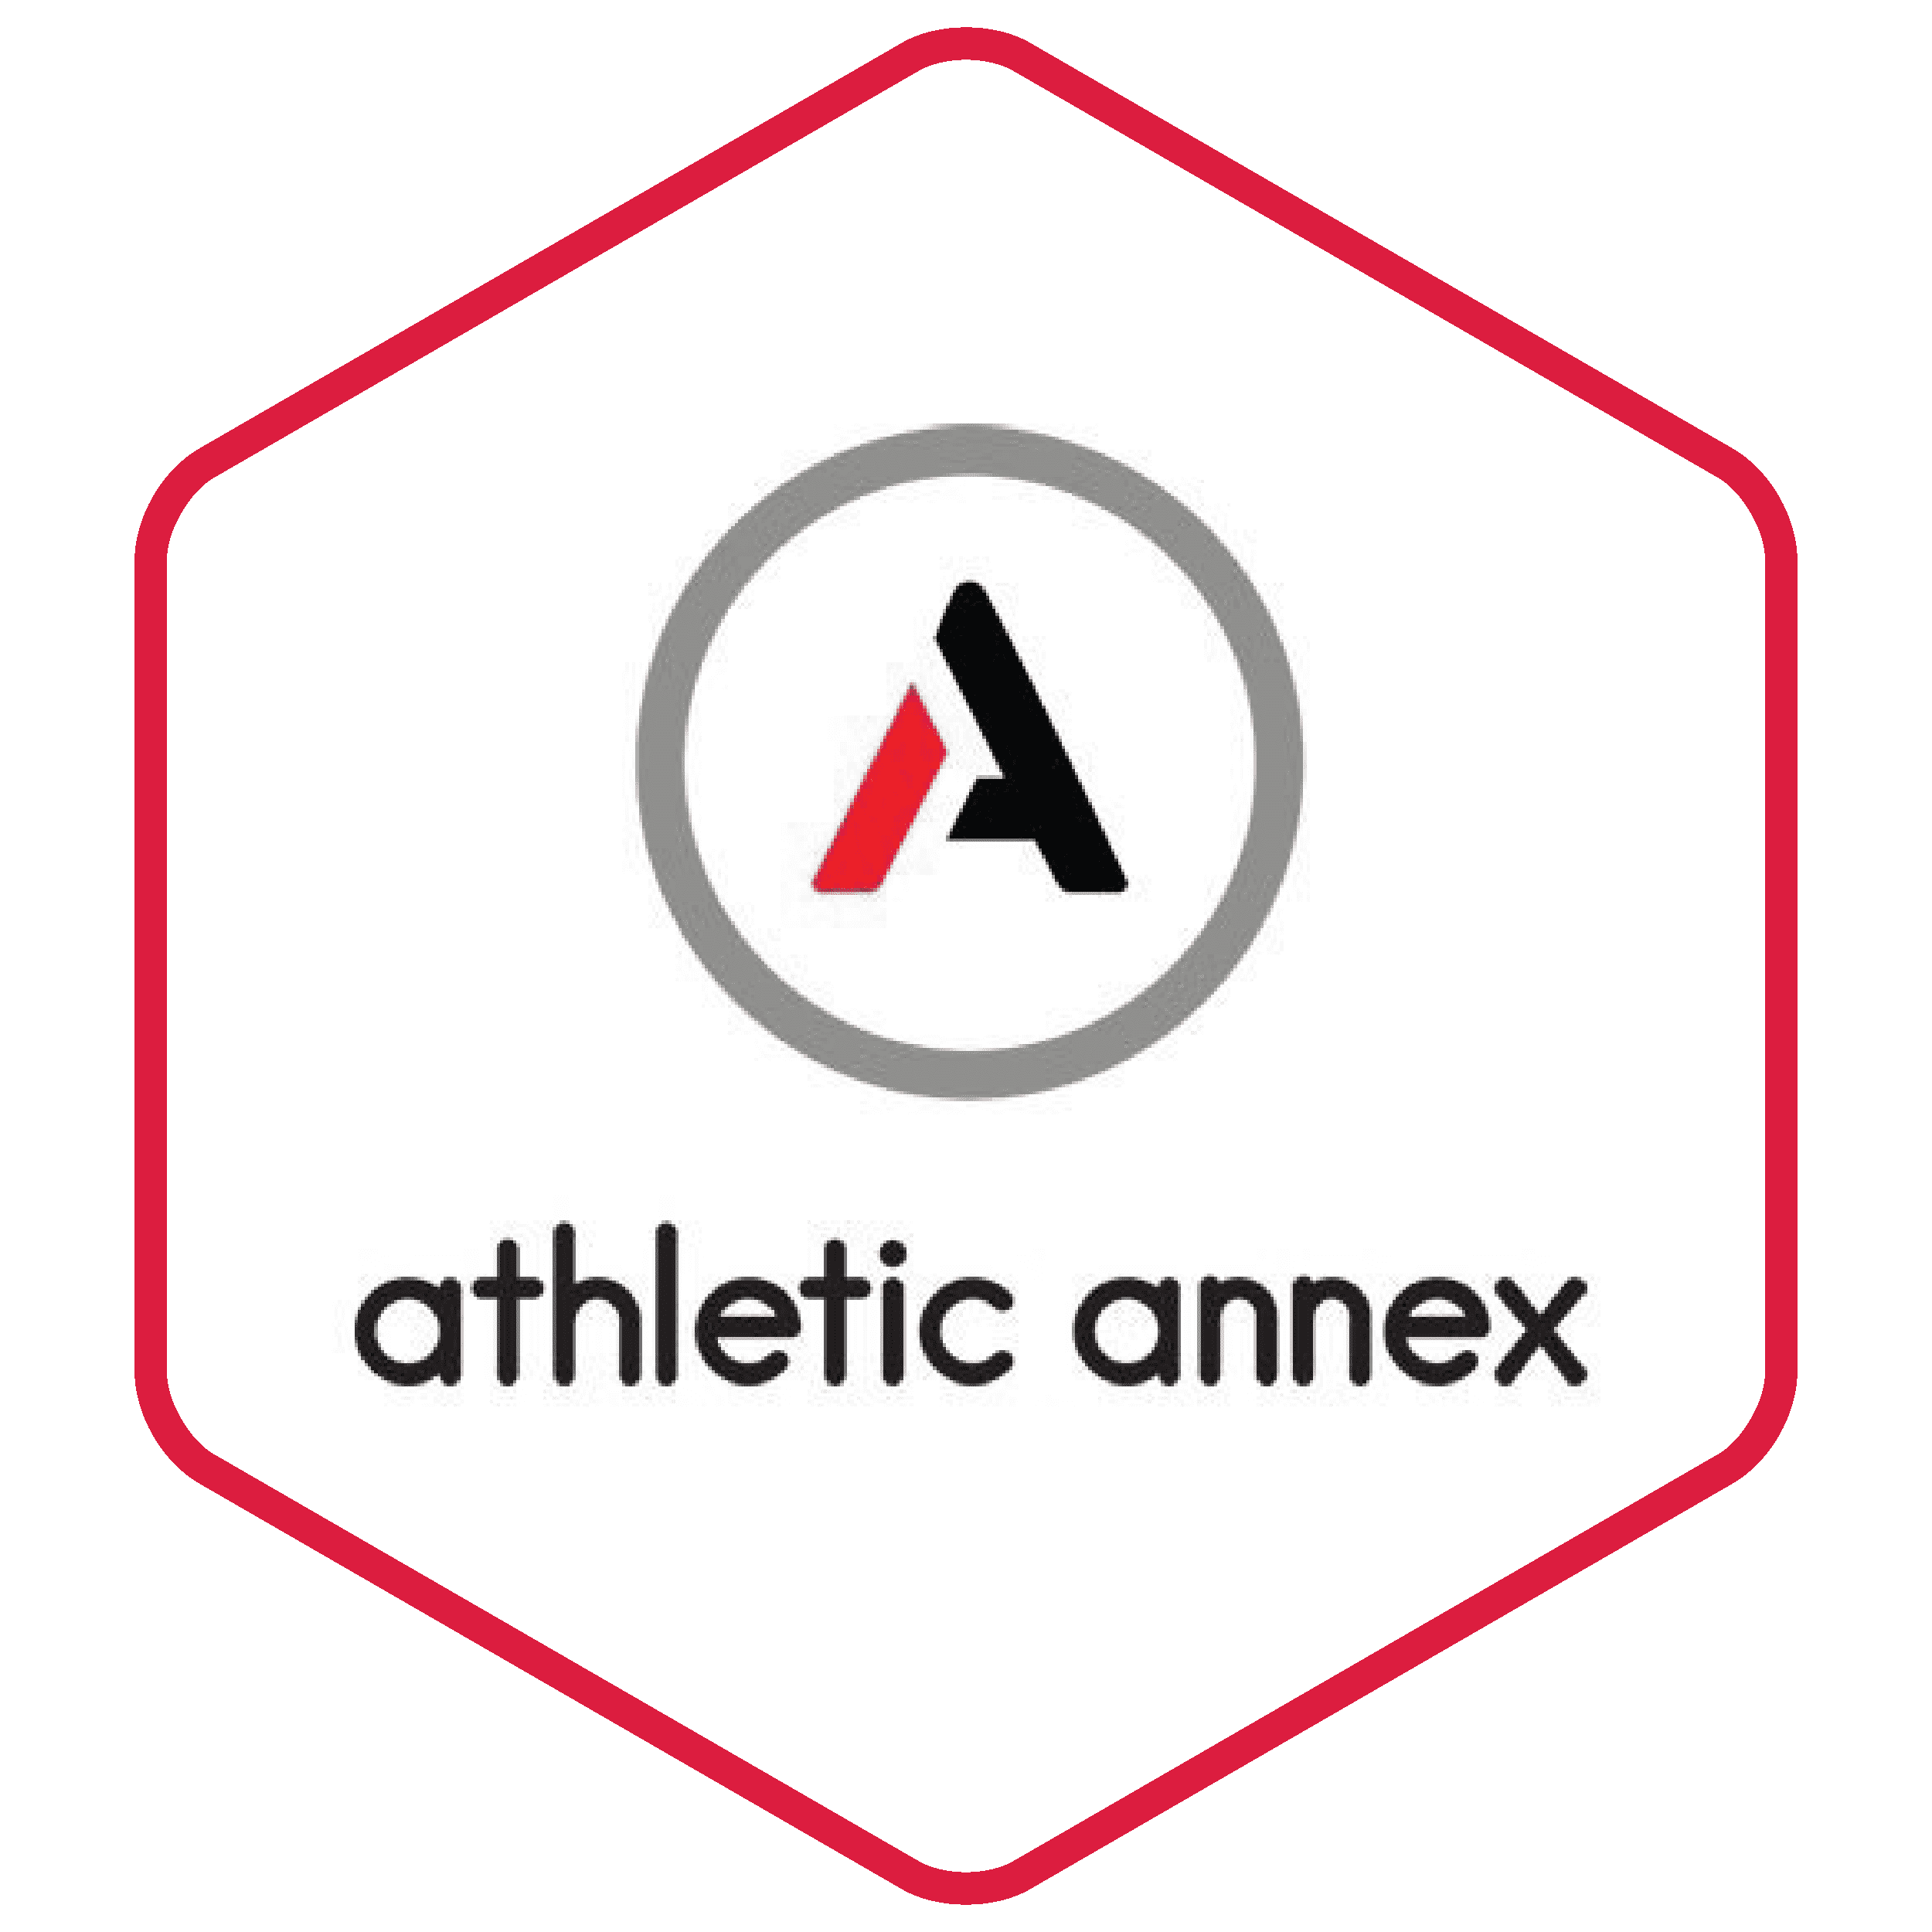 atheltic annex's logo in a red hexagon